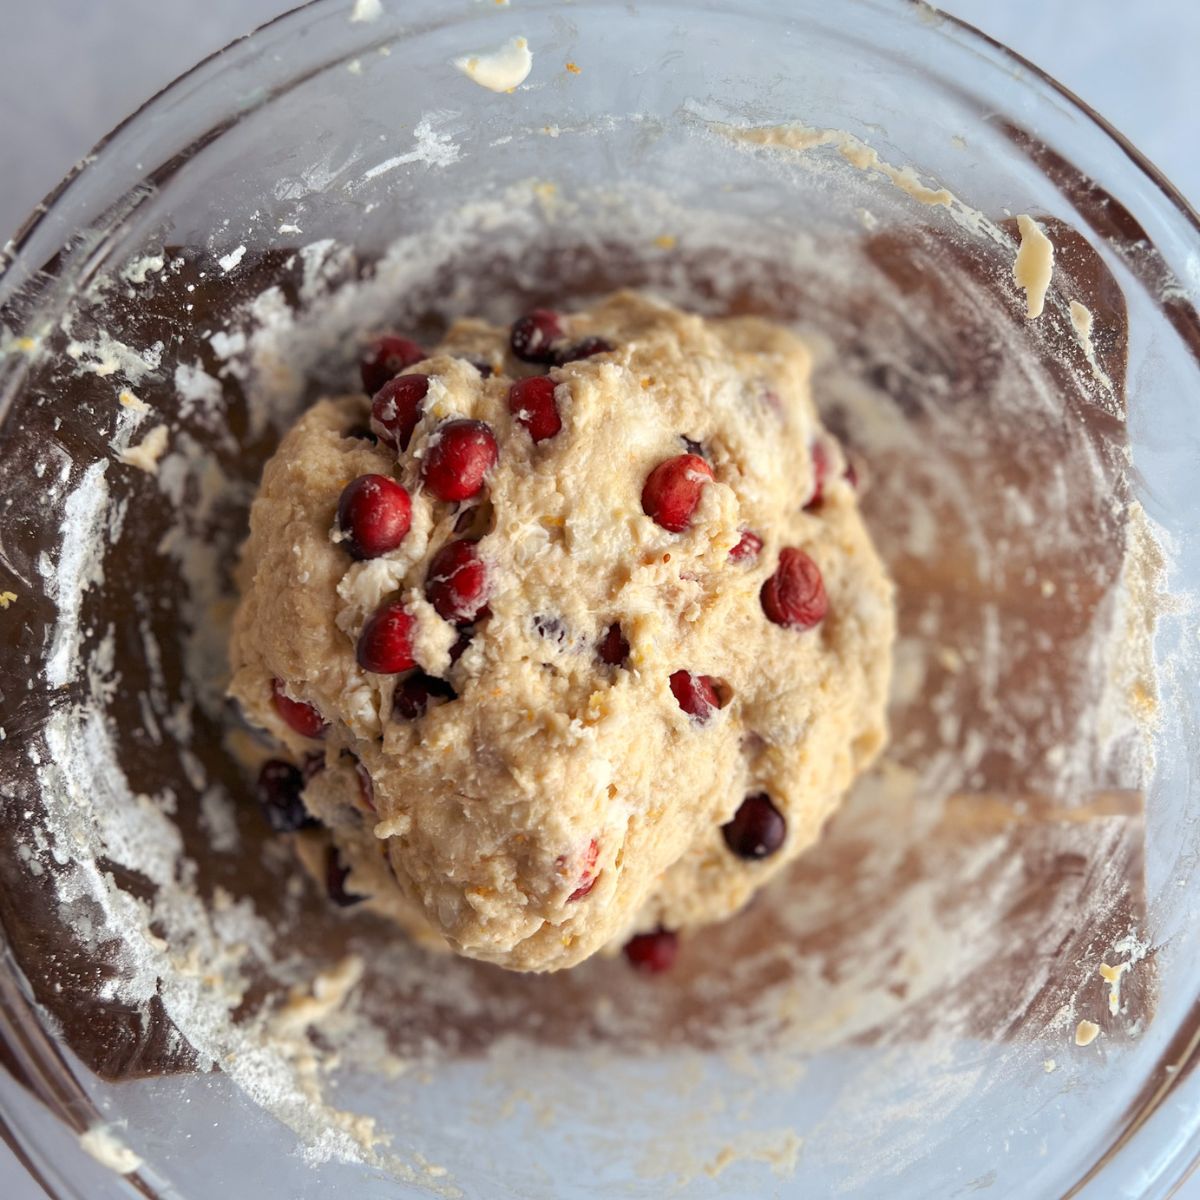 Ball of scone dough with cranberries.